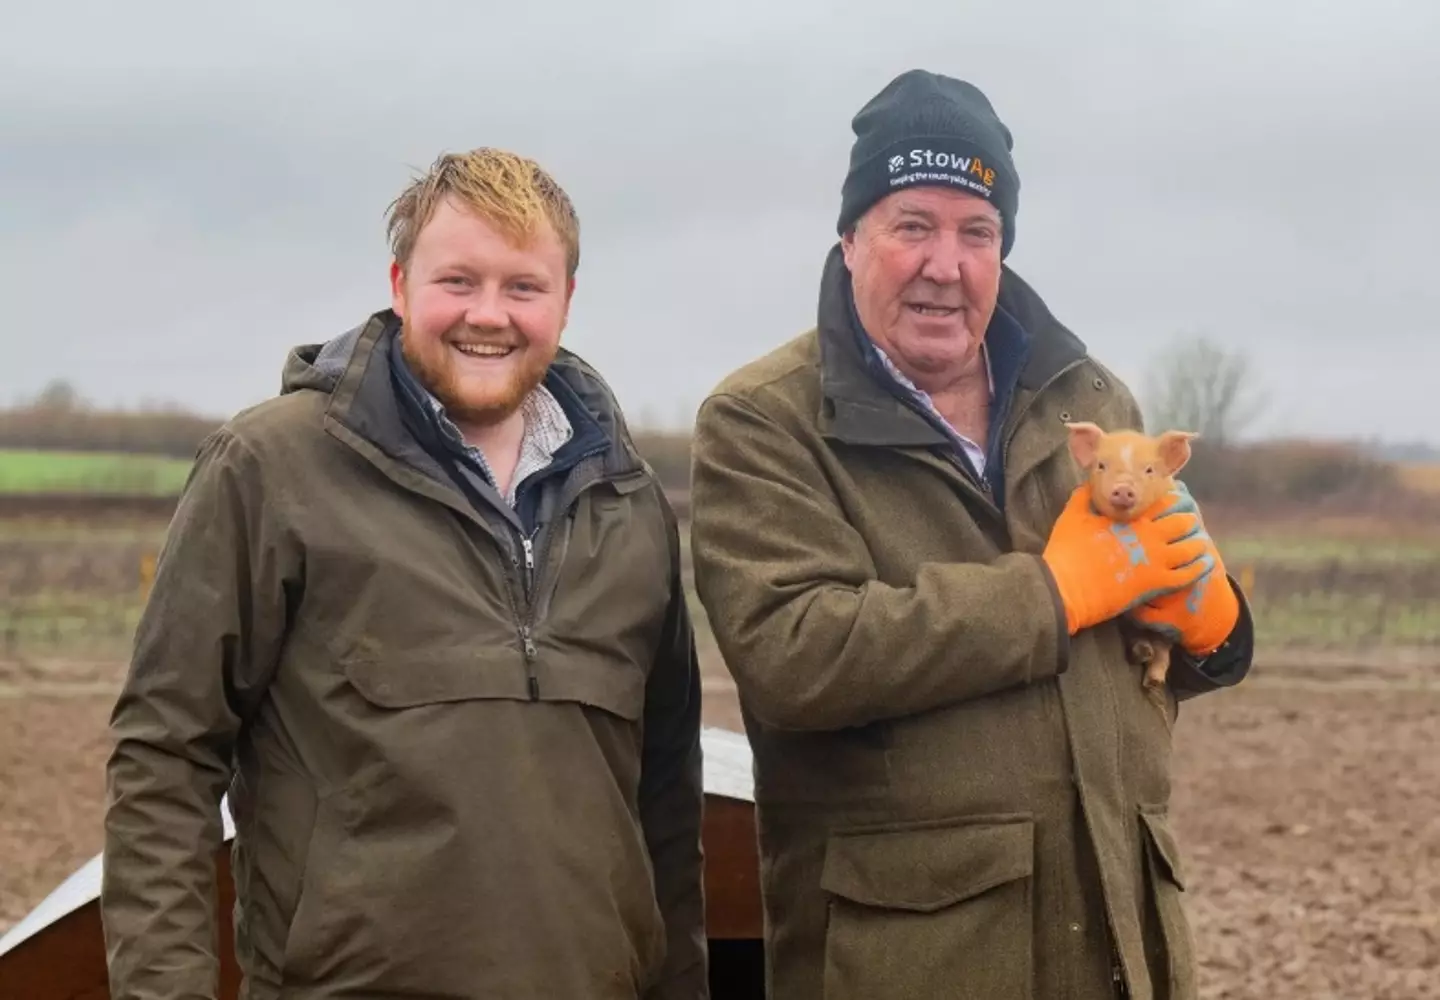 Season three of Clarkson's Farm is coming in about three months.